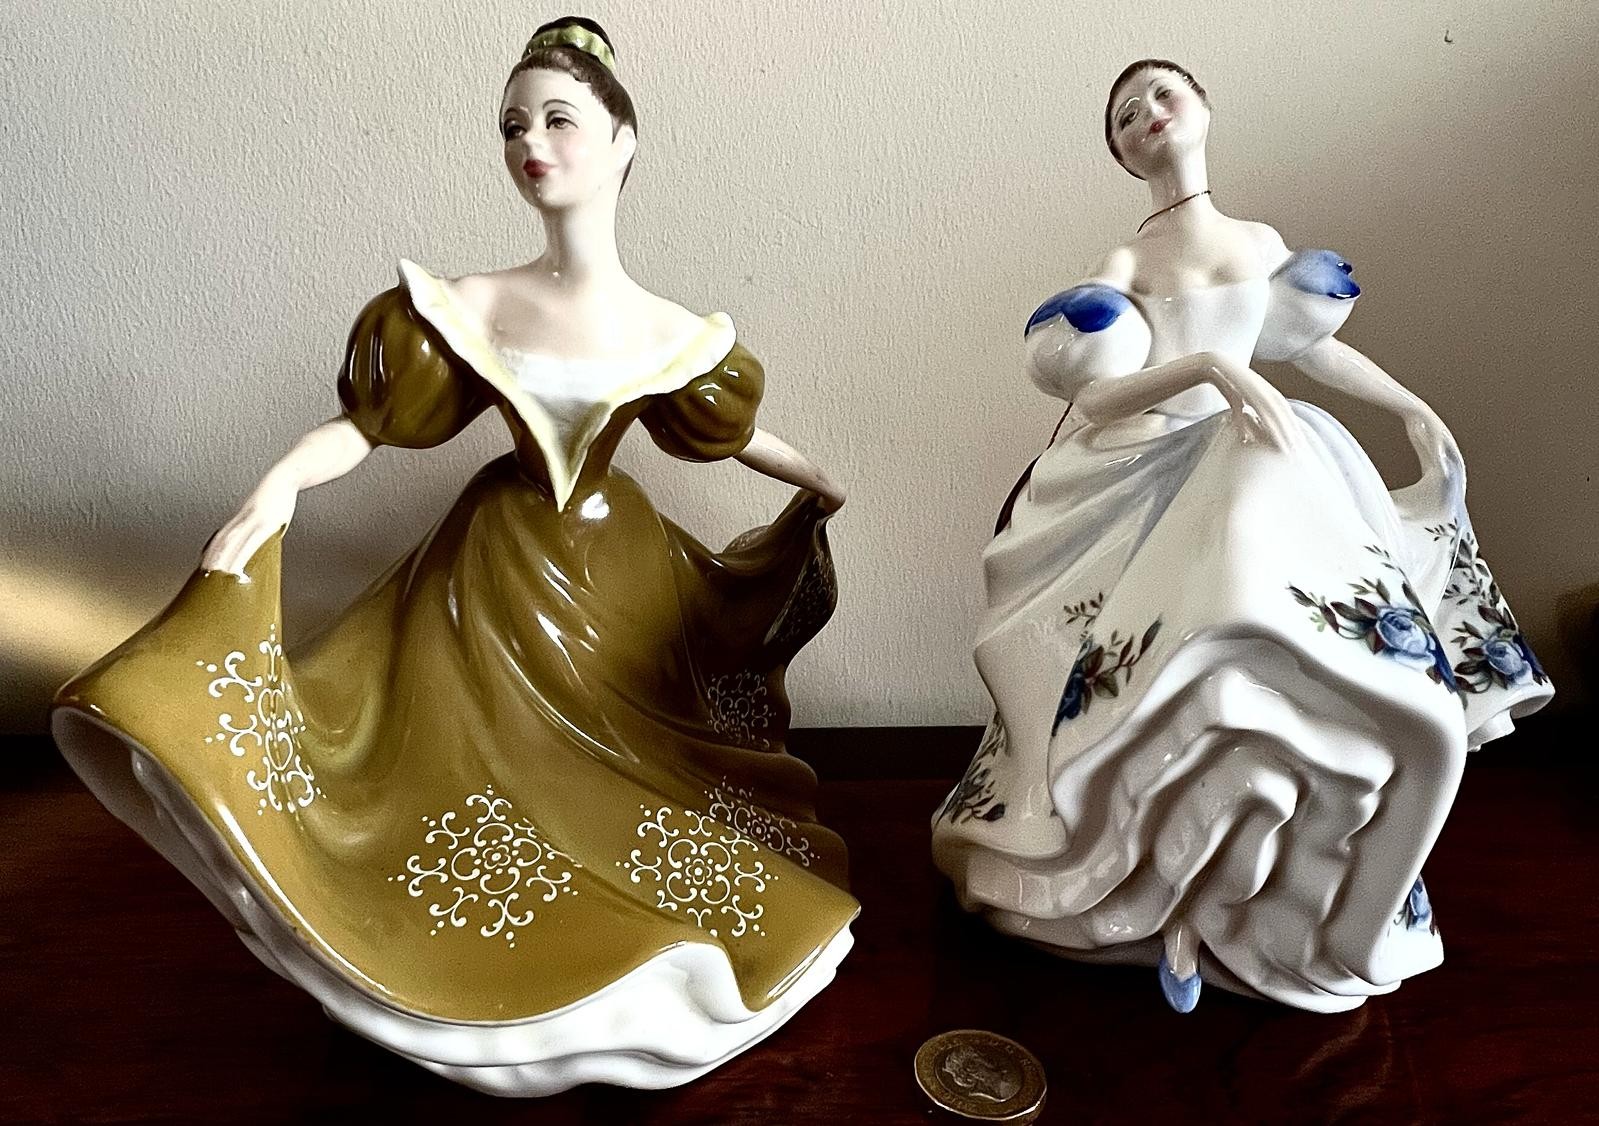 ROYAL DOULTON FIGURES BEATRICE HN3263 AND LYNNE HN2329, MODELLED BY PEGGY DAVIES, APPROX 20cm HIGH